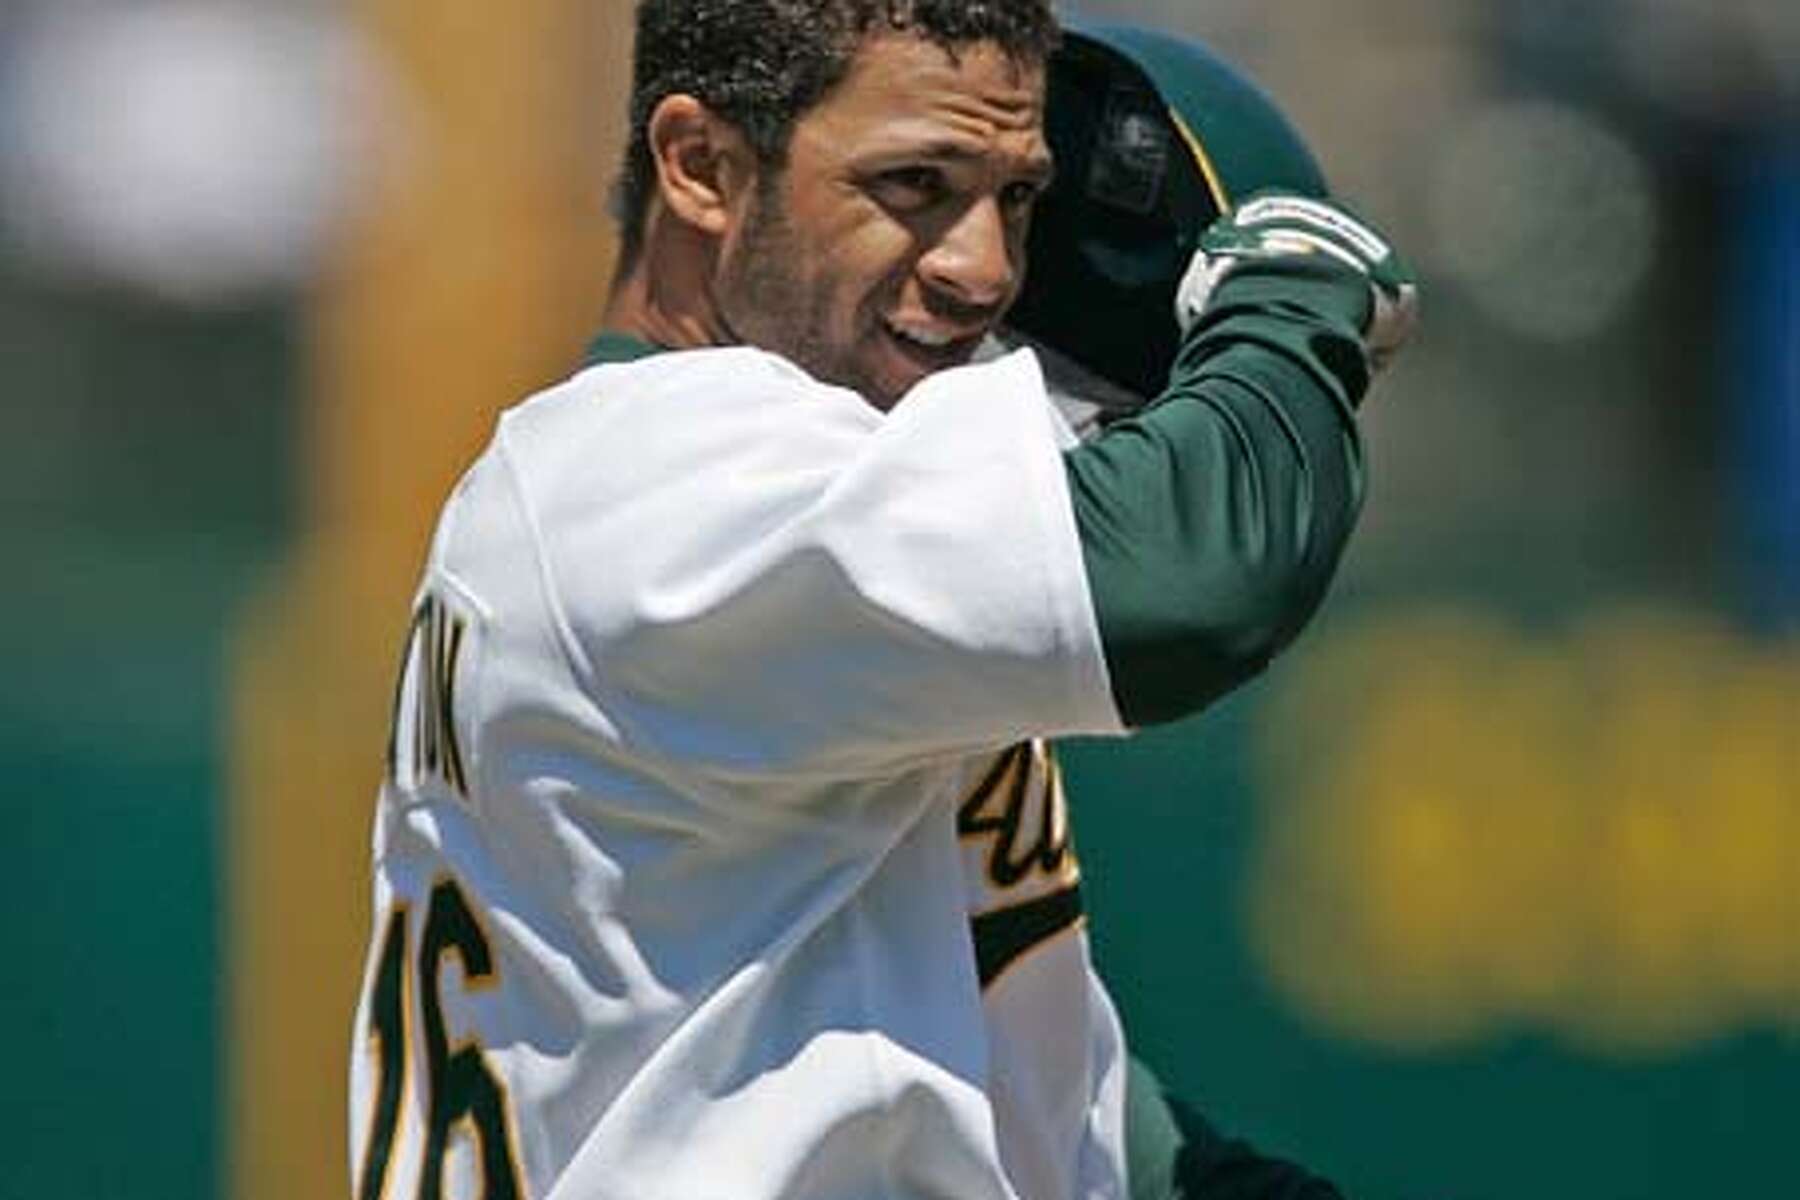 He played for the A's? Nomar Garciaparra and other stars with